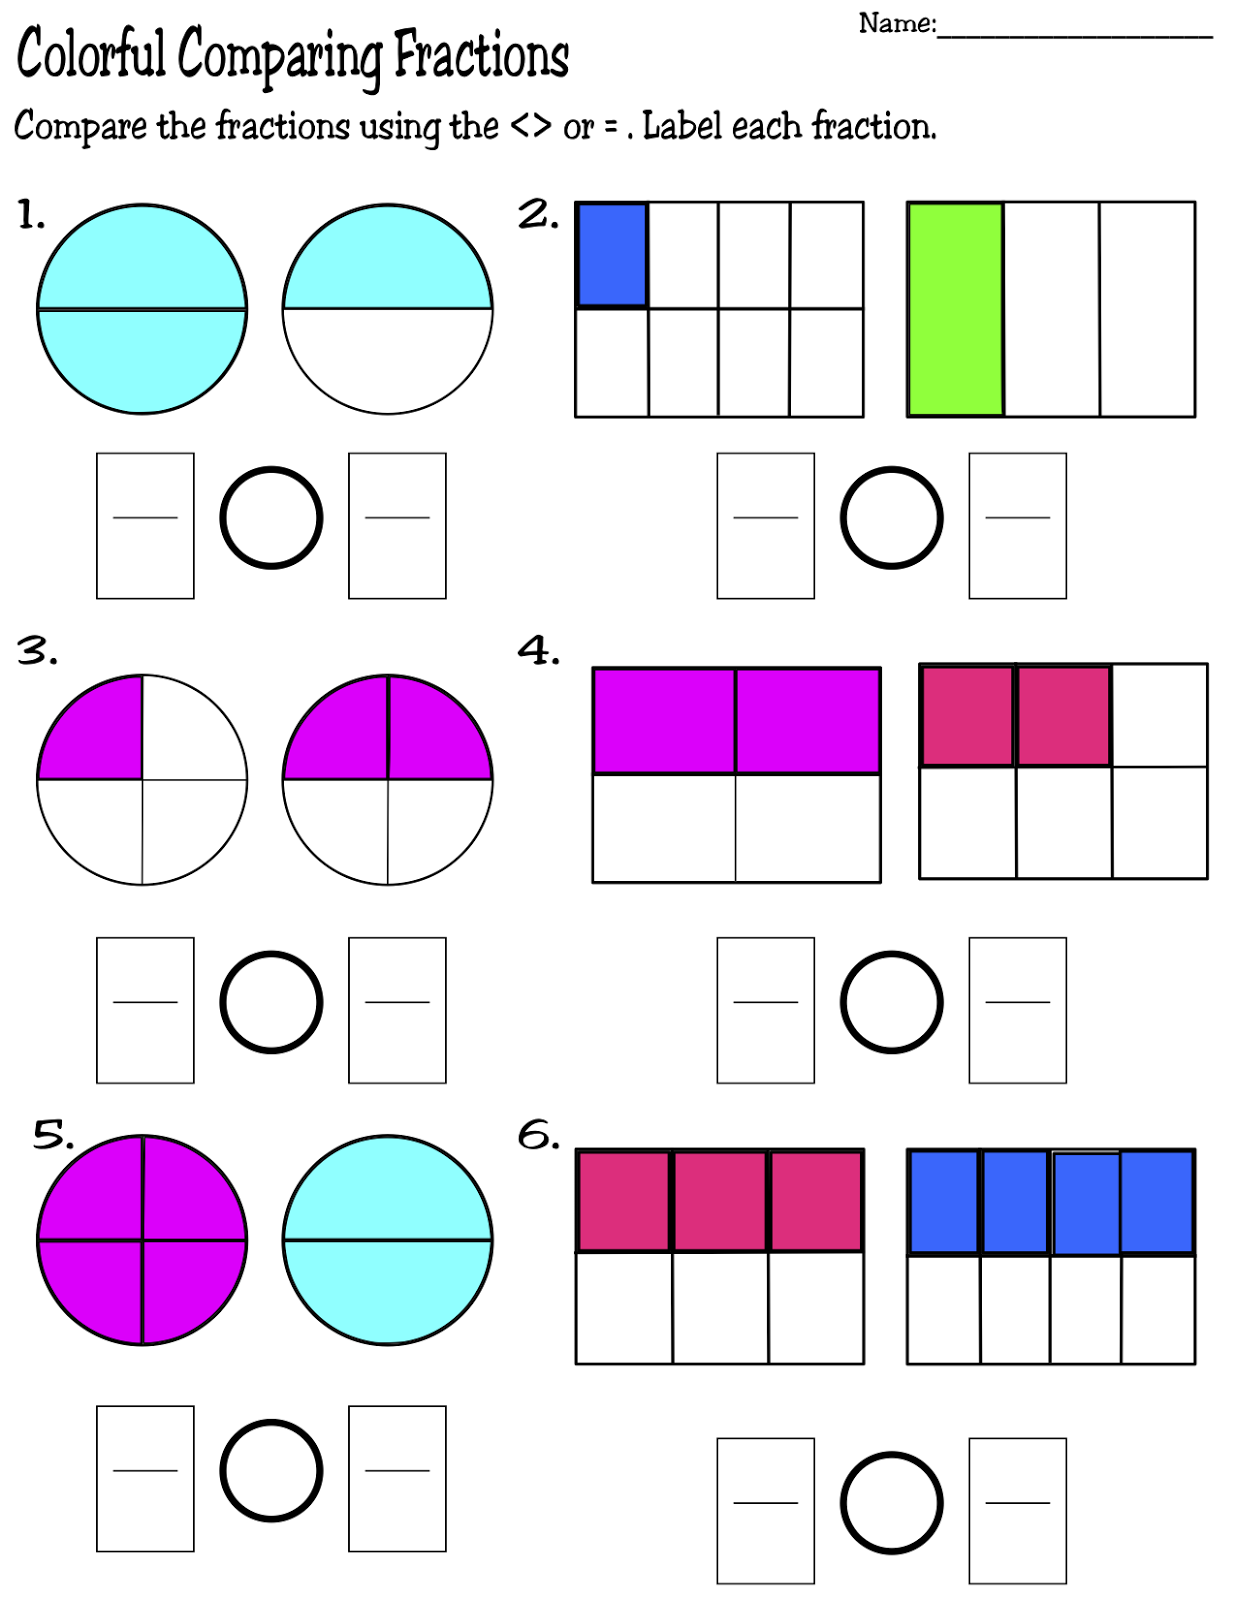 Comparing Fractions With Like Numerators Worksheet - Printable Word